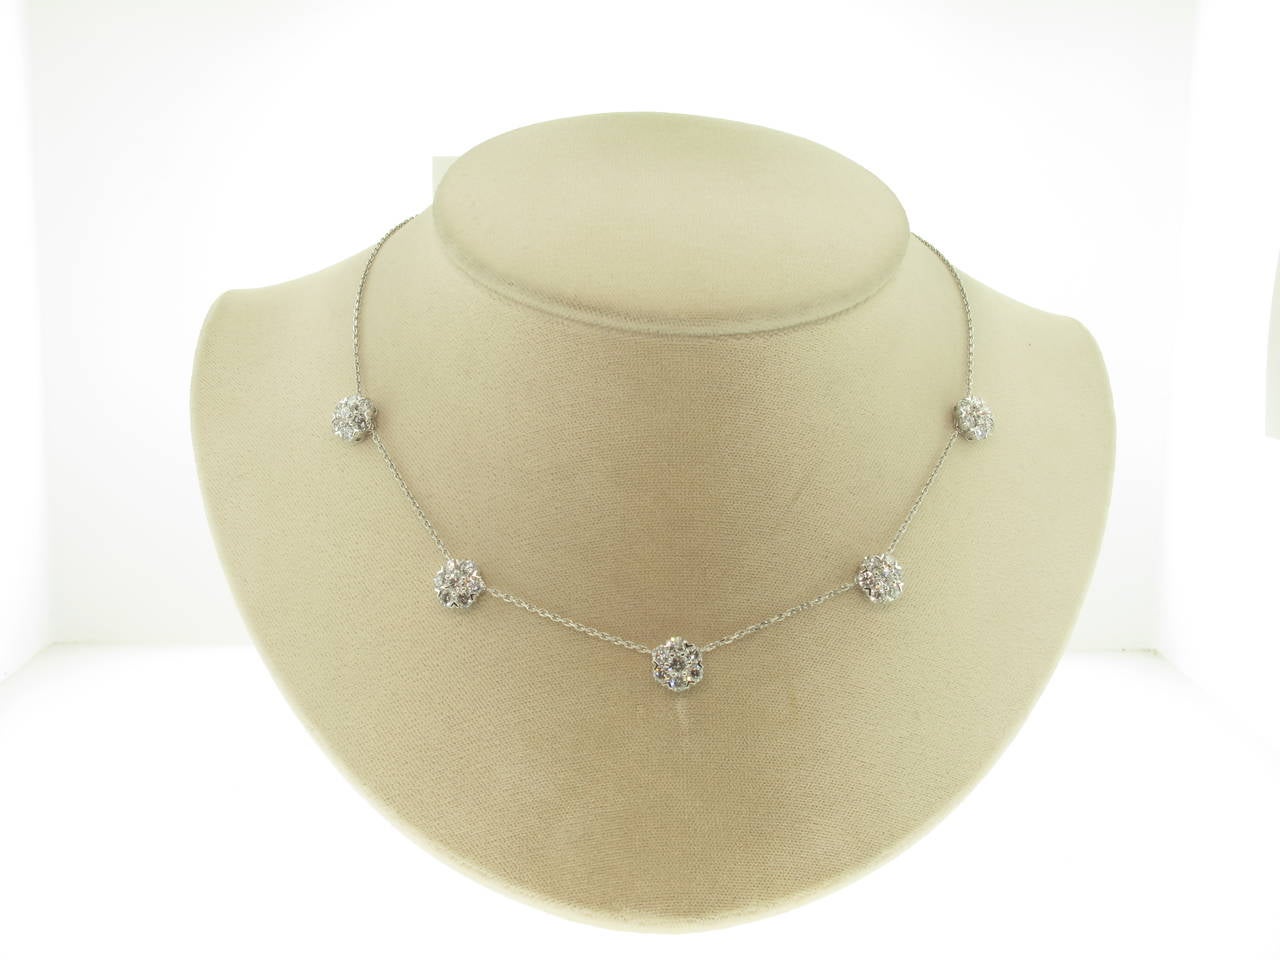 This Van Cleef & Arpels Fleurette necklace contains 5 diamond flowers. It is the large model.  The necklace is made in 18 karat white gold with round diamonds; diamond quality D-E, IF-VVS. There are 35 prong-set diamonds in the necklace with a total